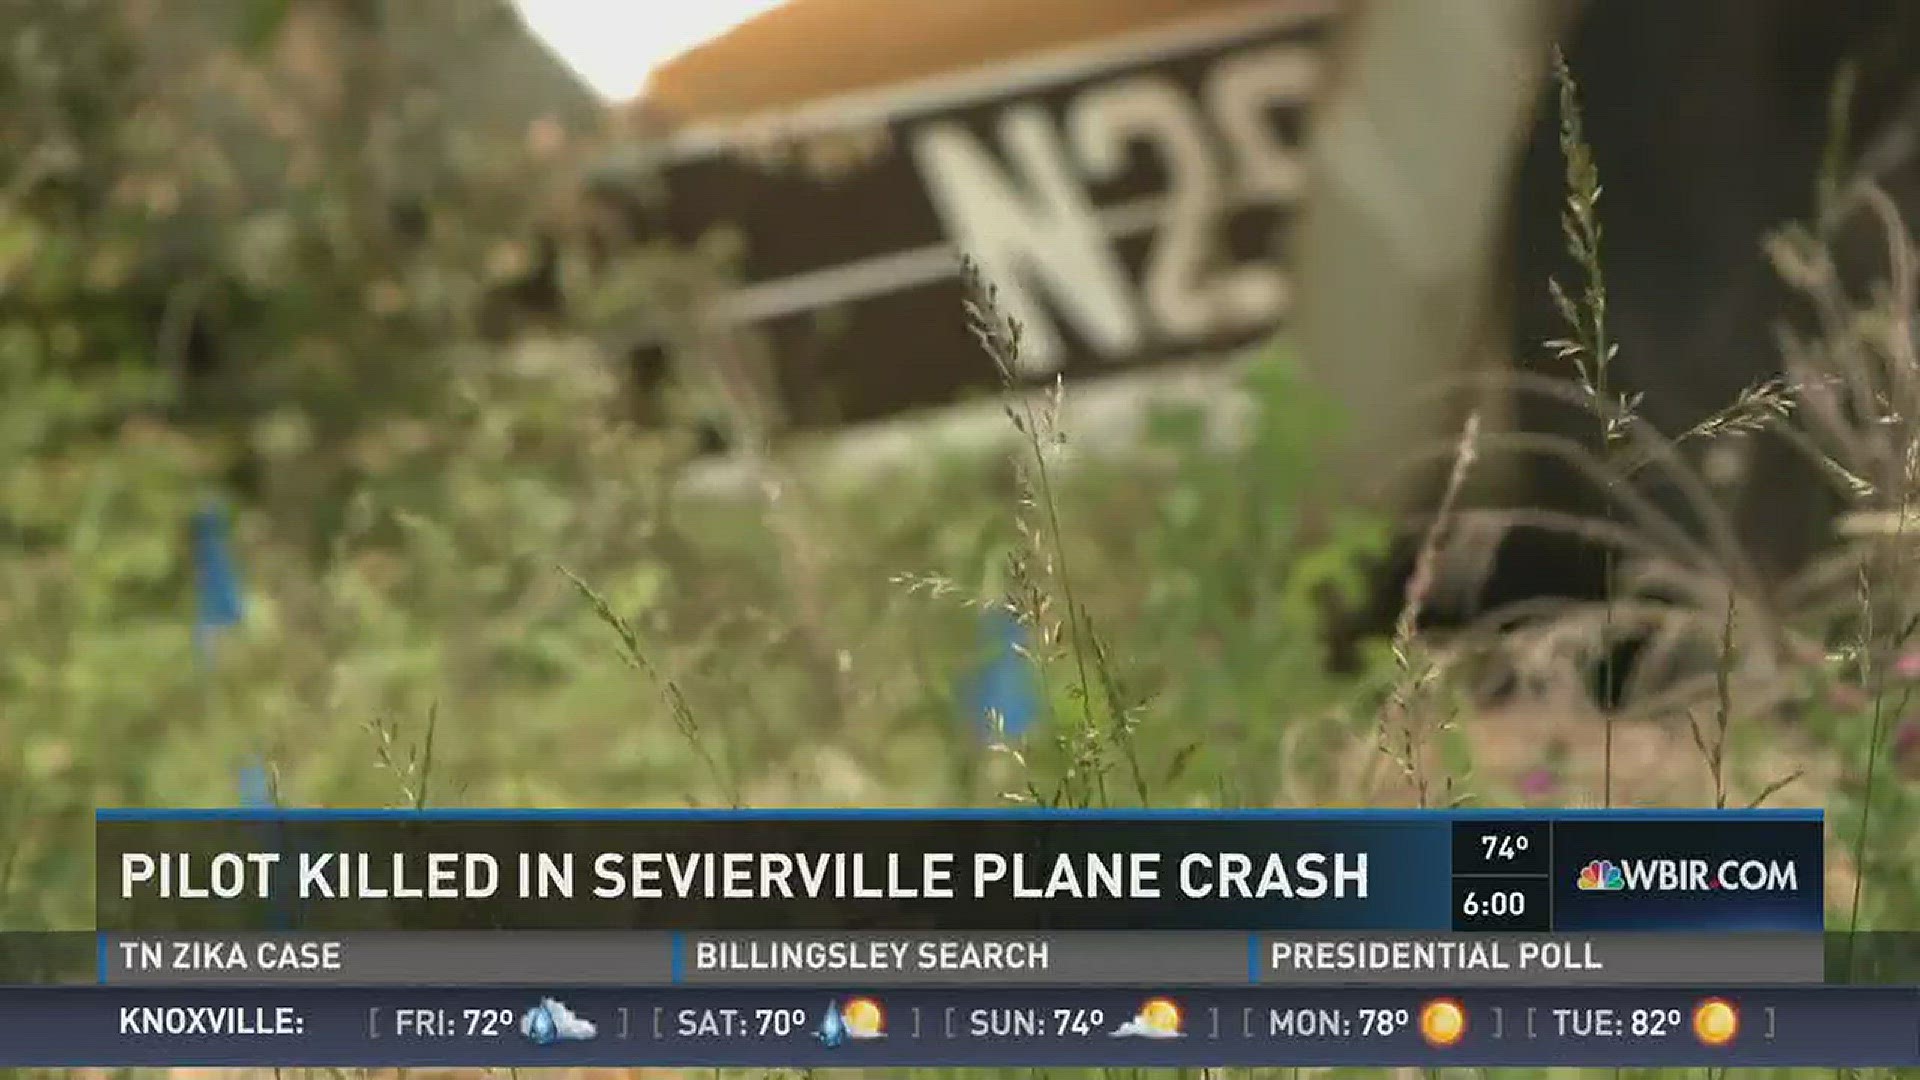 10News reporter Michael Crowe has the latest on a plane crash in Sevierville that killed a pilot. (5/19/16 at 6 p.m.)